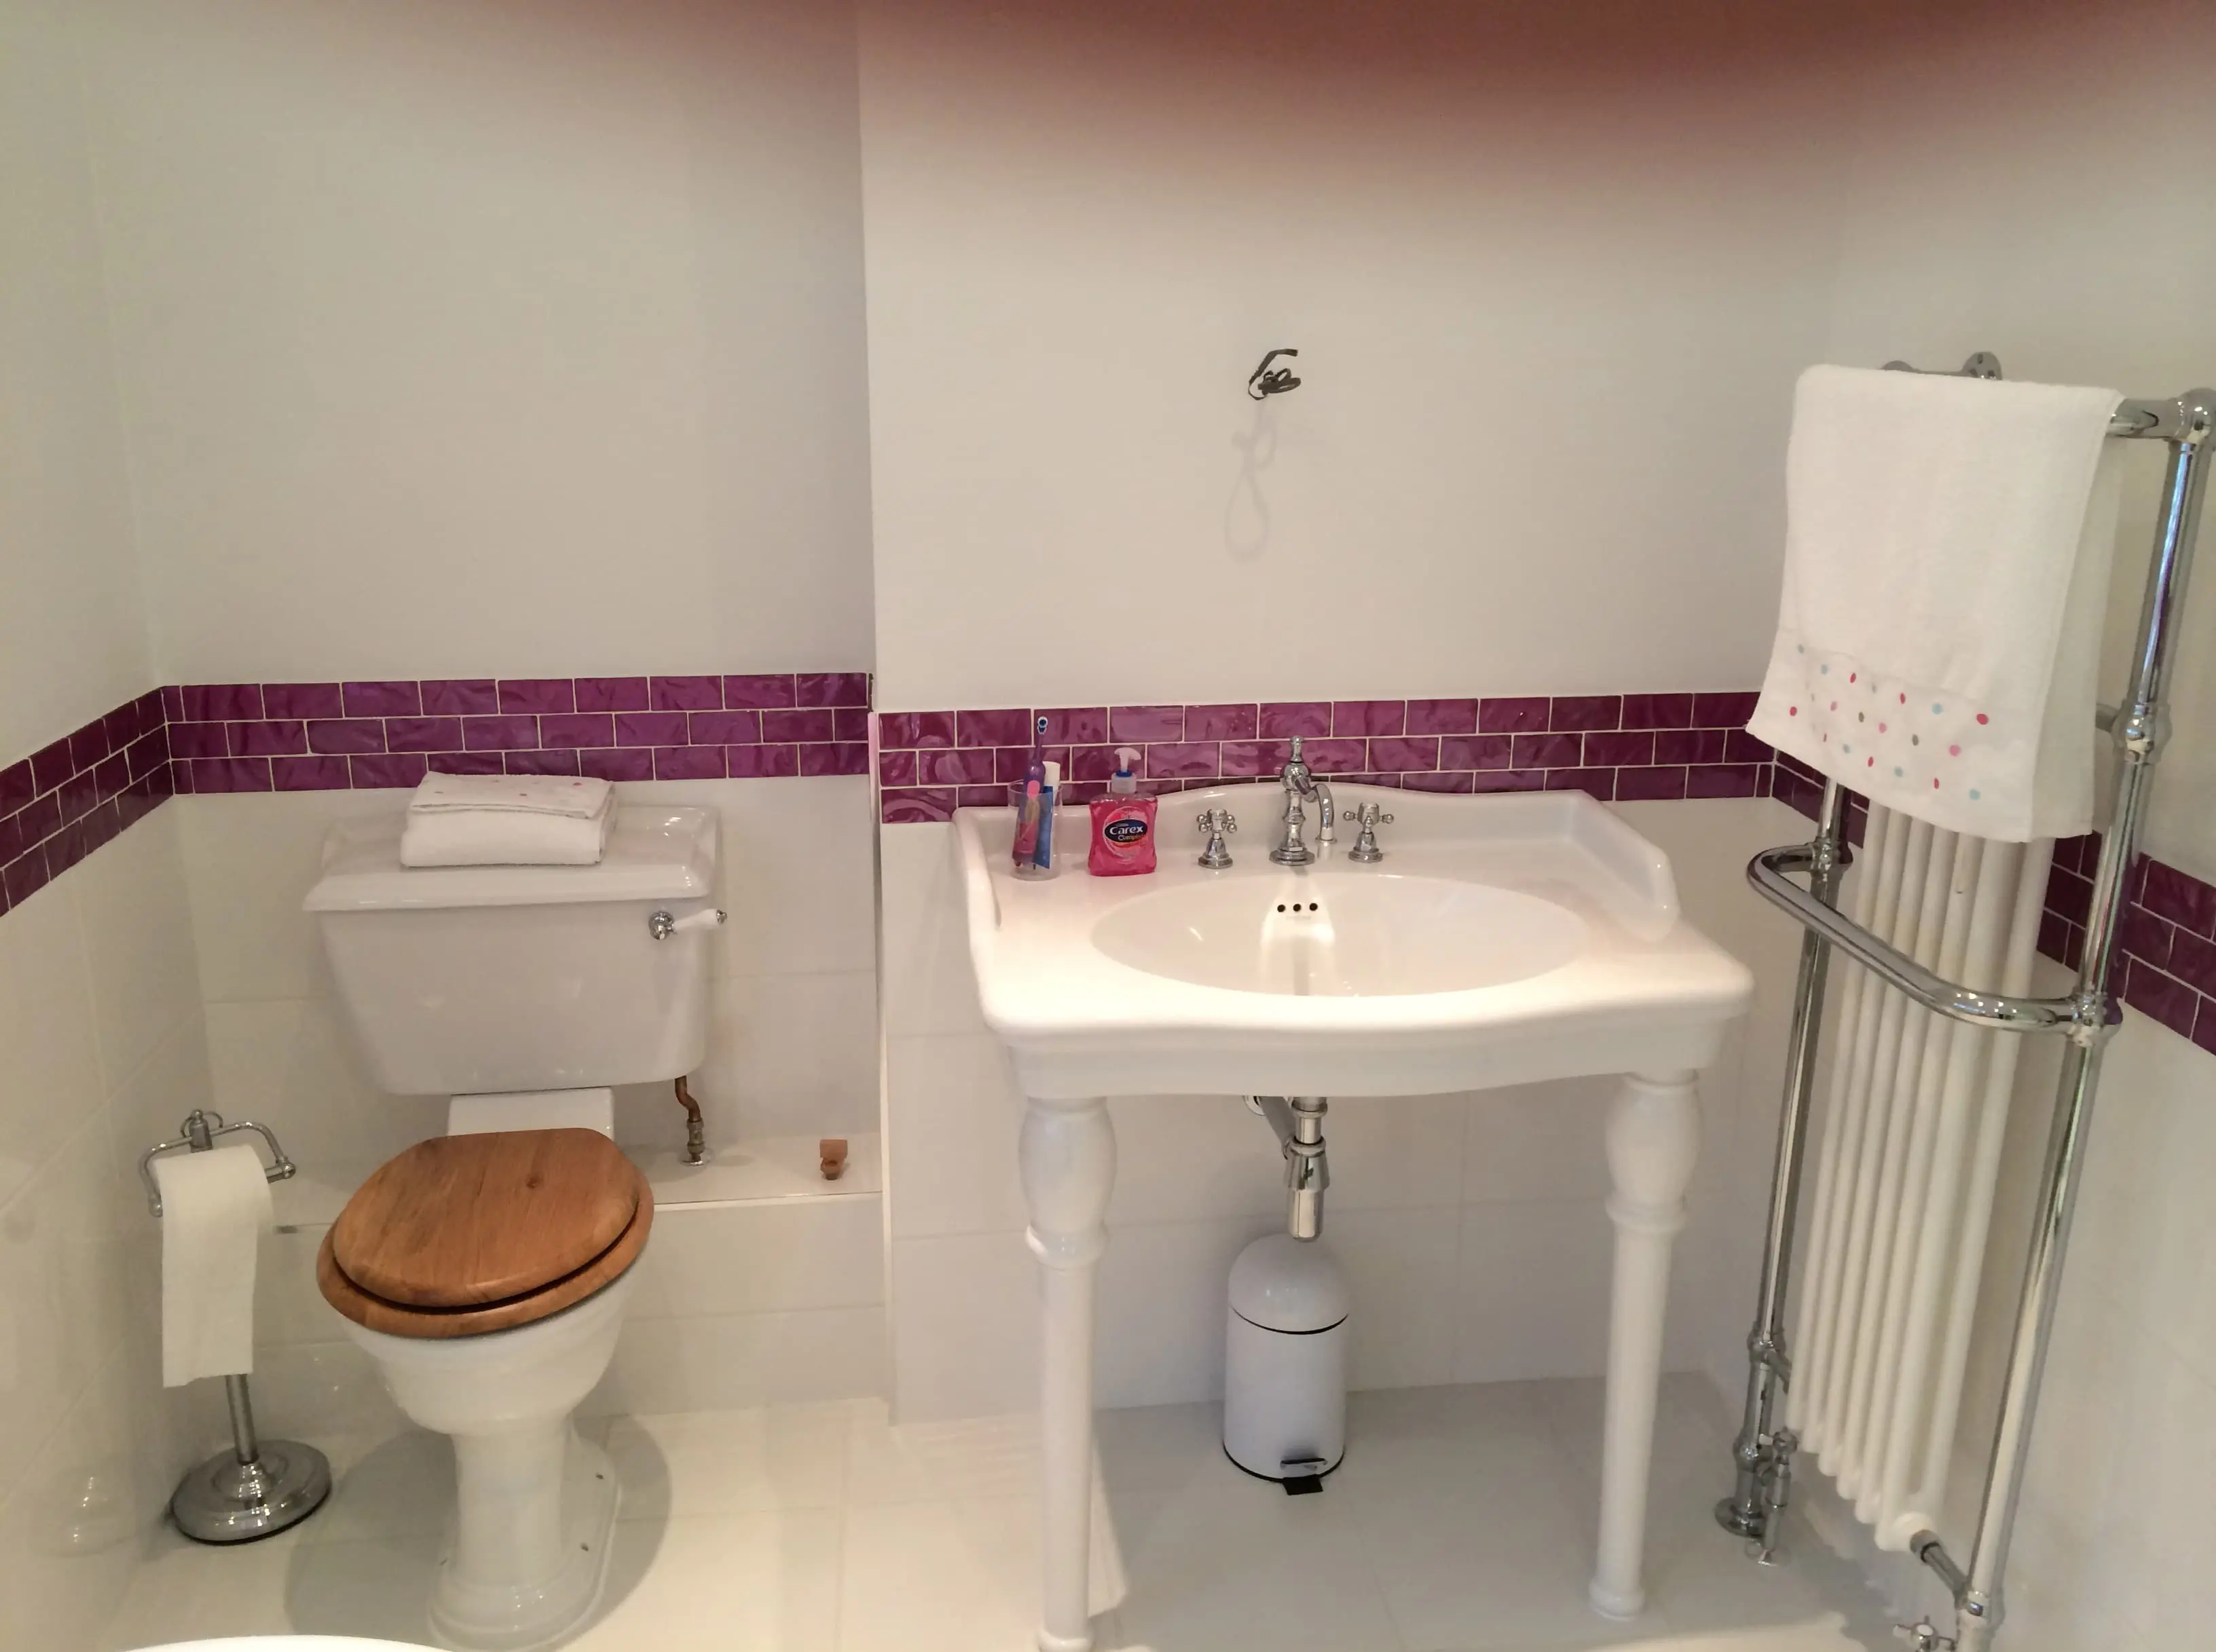 At Plumbing 4 U, we can tailor our tiling services to suit your budget. The team are fully qualified, with over 40 years of experience in the tiling industry, so you can be sure you are in good hands.&nbsp;In addition to tiling, we also offer&nbsp;plumbing&nbsp;and&nbsp;bathroom&nbsp;installations. Why not give us a call today to discuss your requirements for tiling services in Reading?